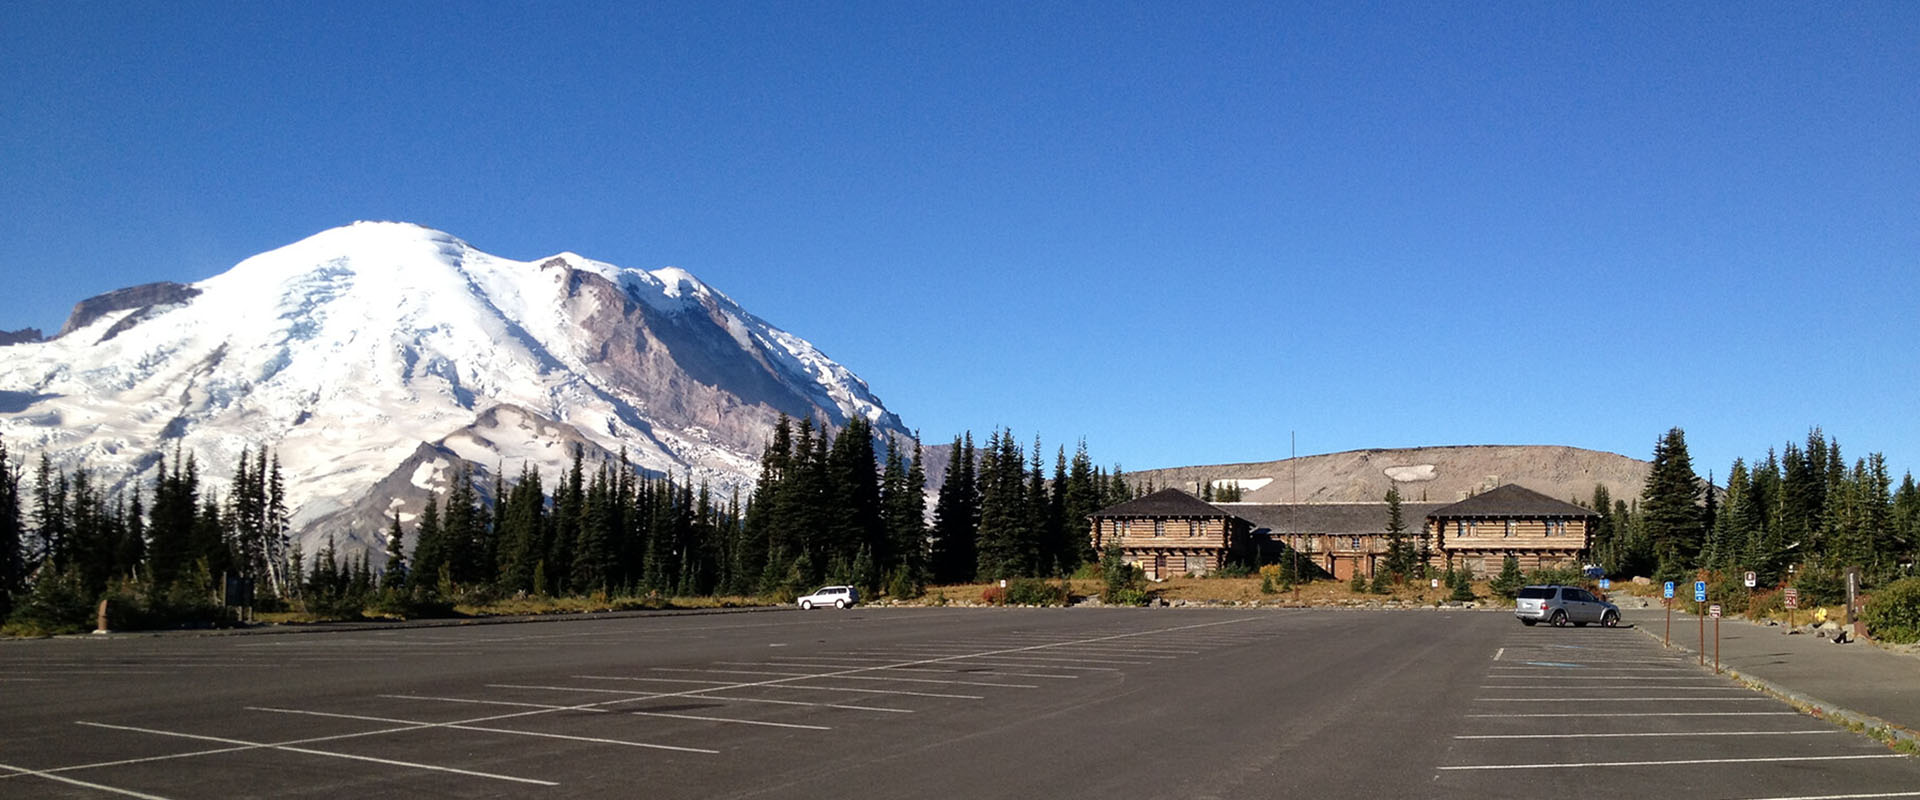 A parking lot with a mountain in the background.